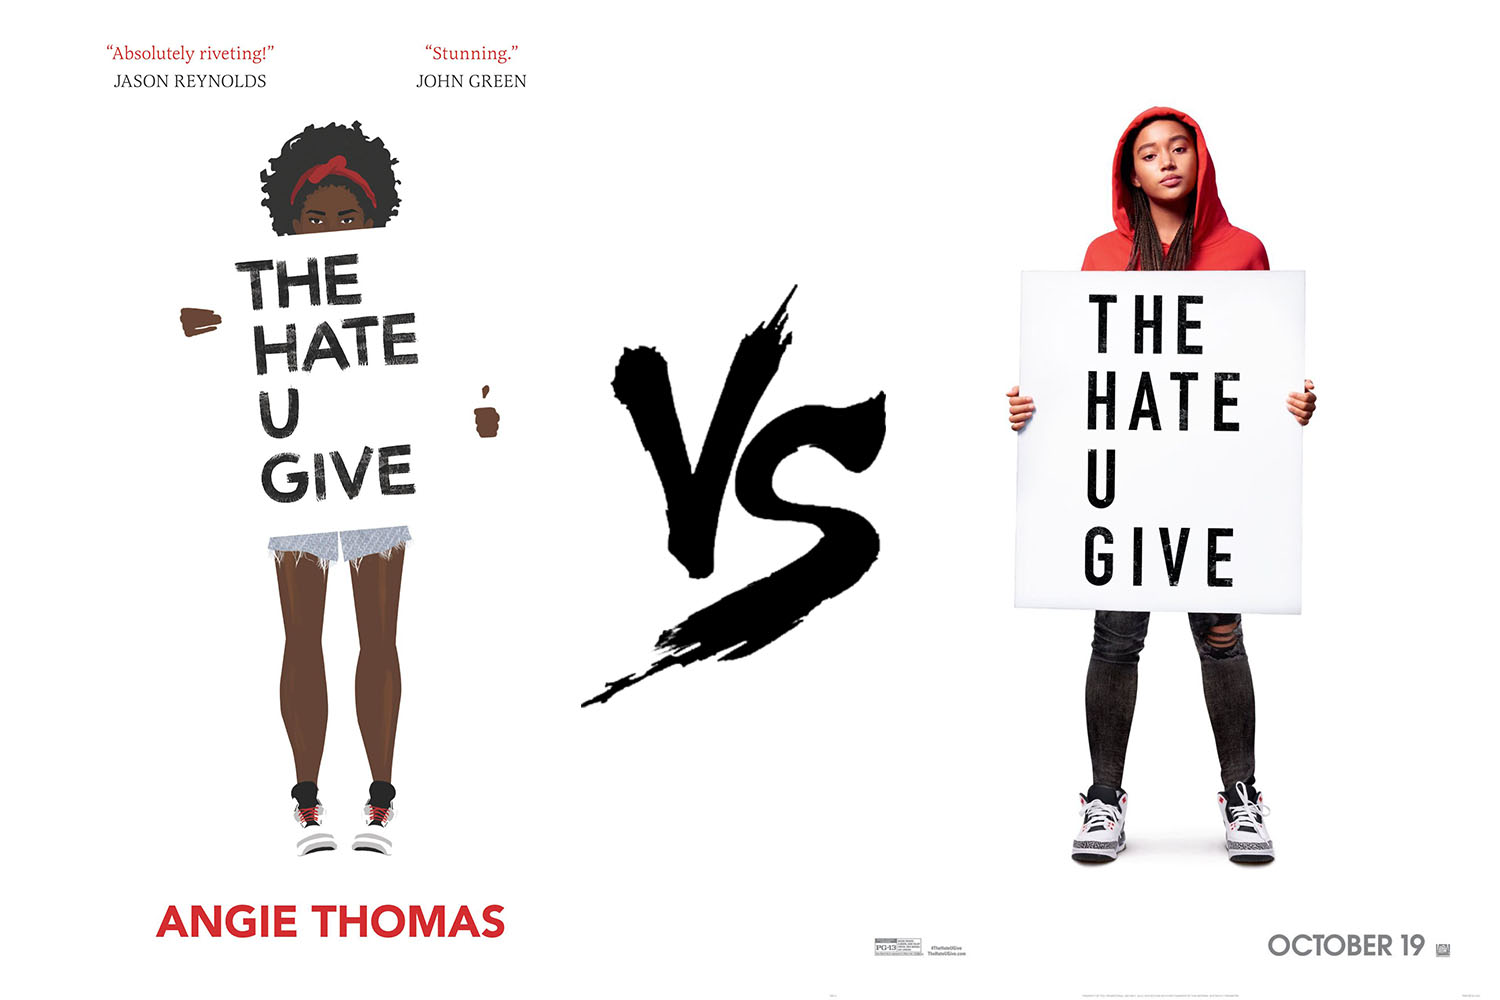 Shows the book cover and movie cover of The Hate U Give